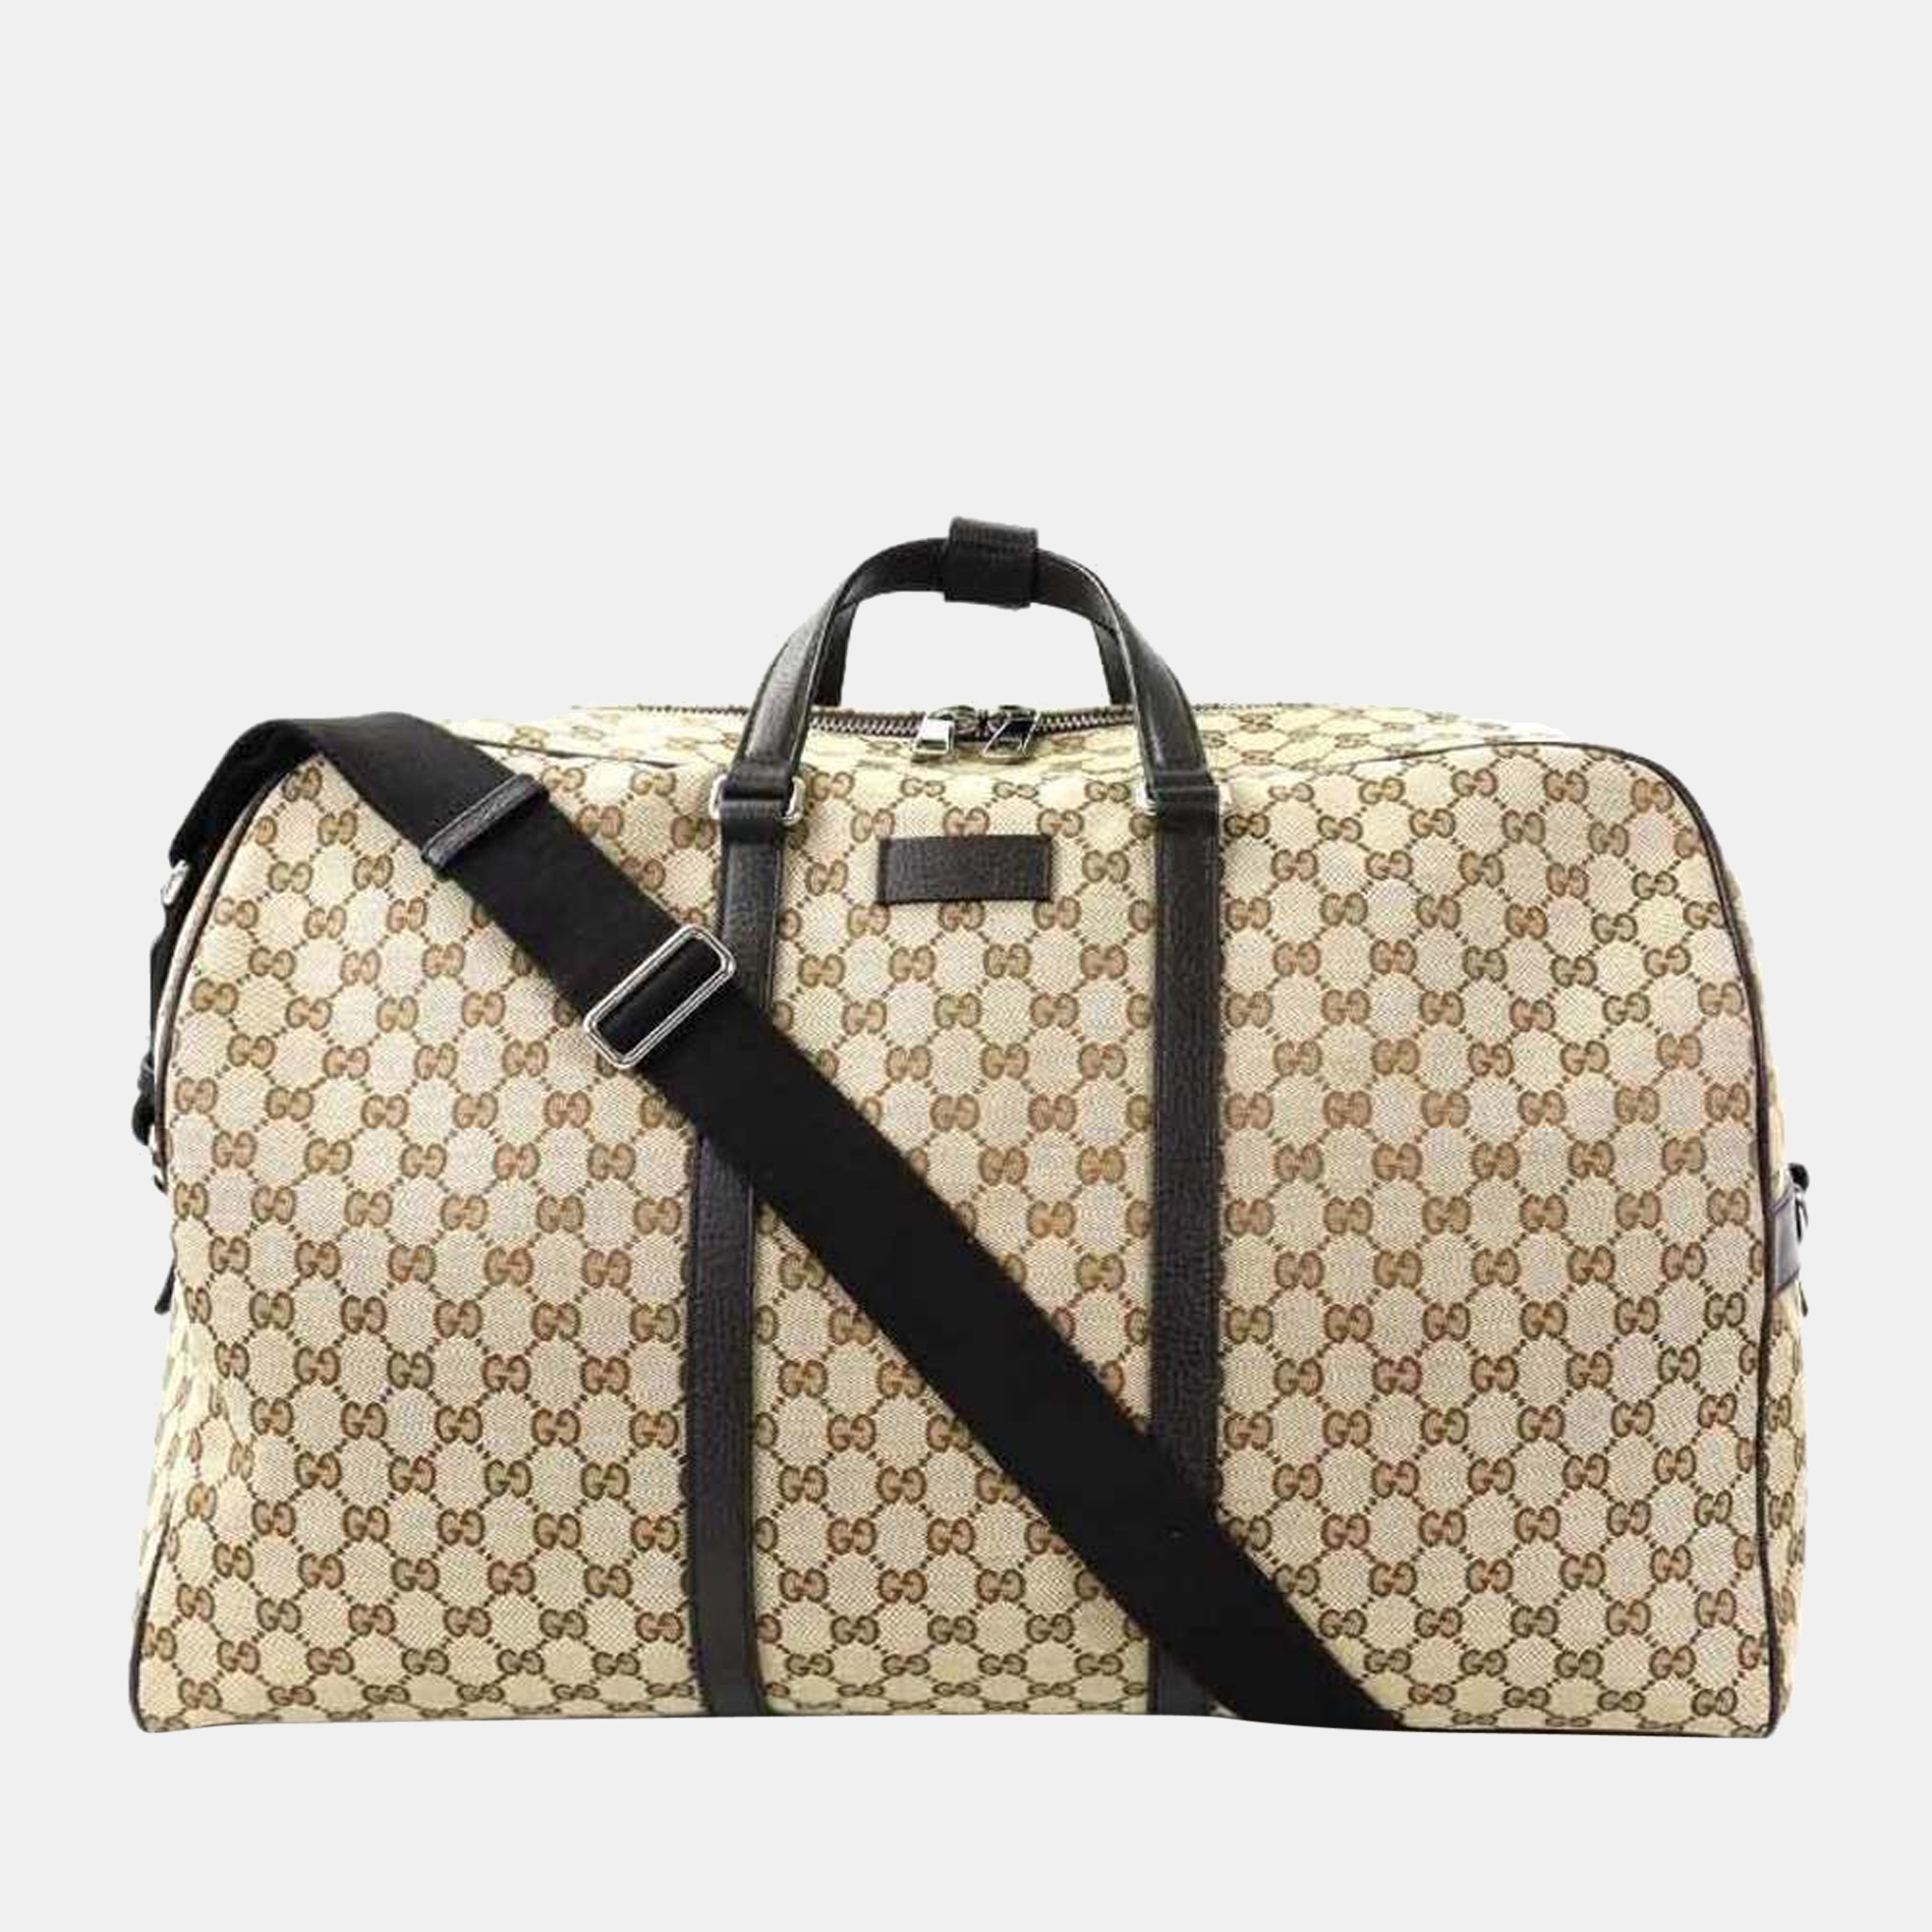 Gucci Beige GG Canvas Convertible Boston Carry On Duffle Bag